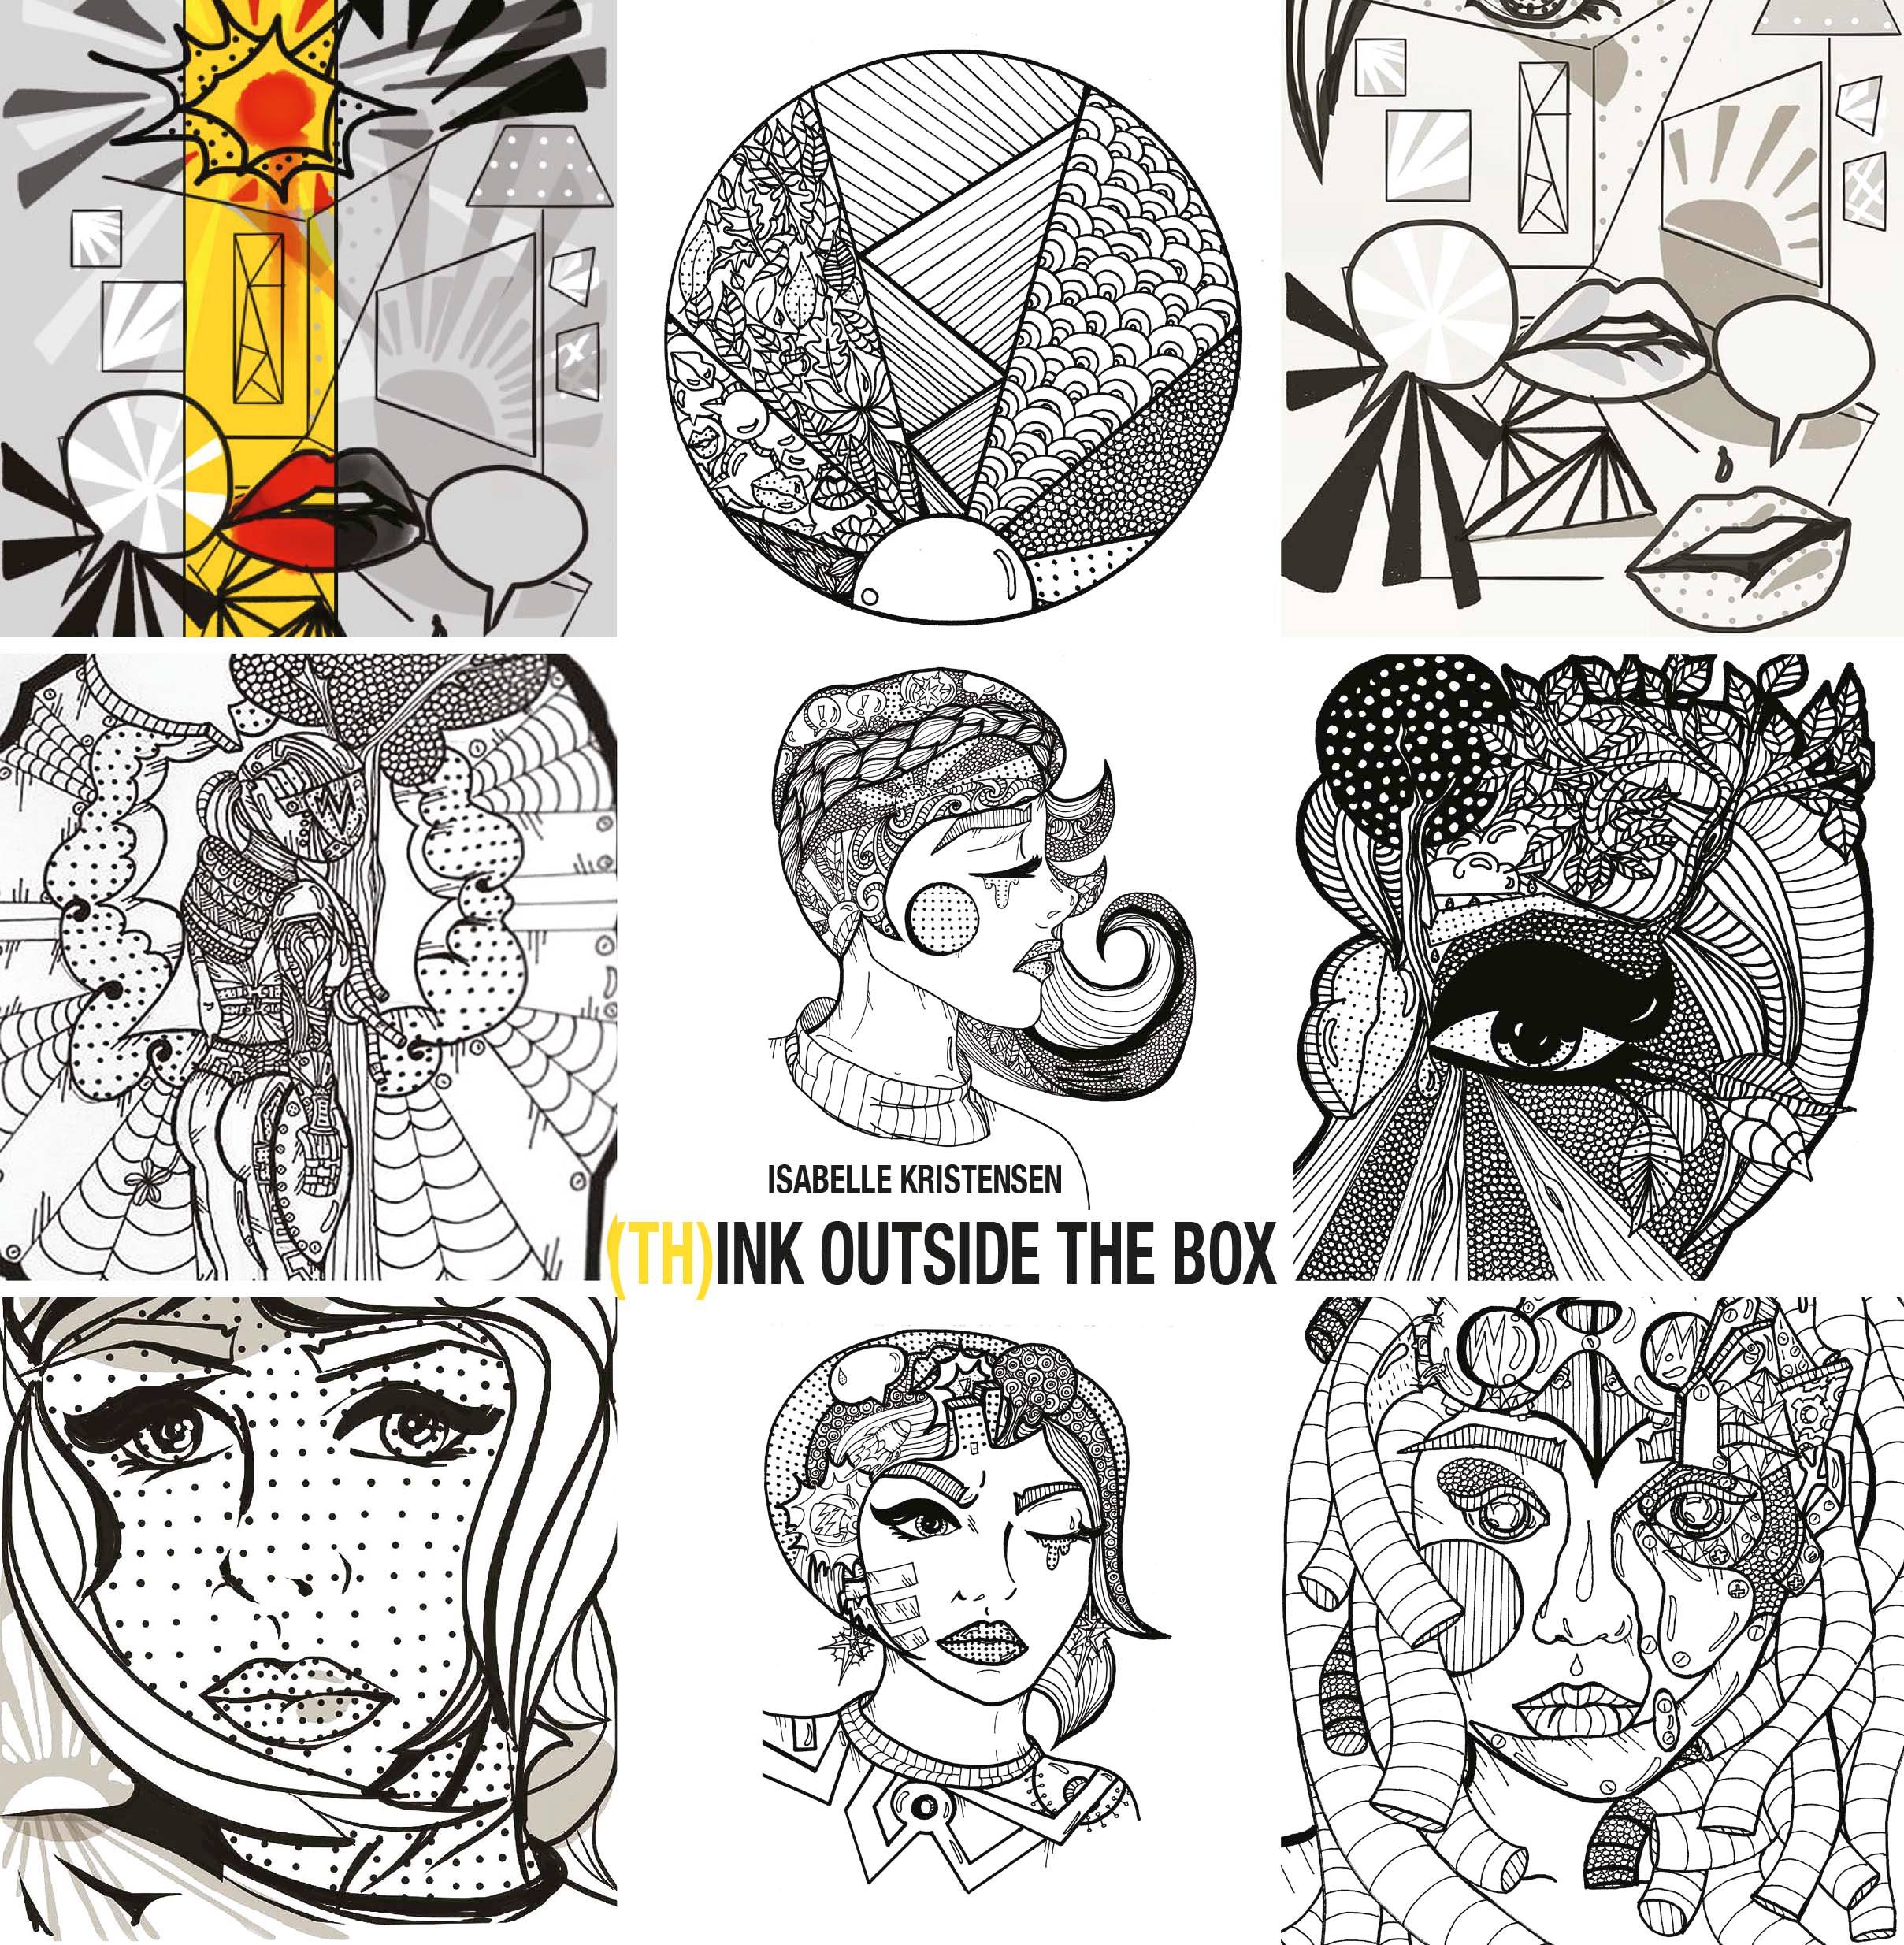 (Th)ink outside the box